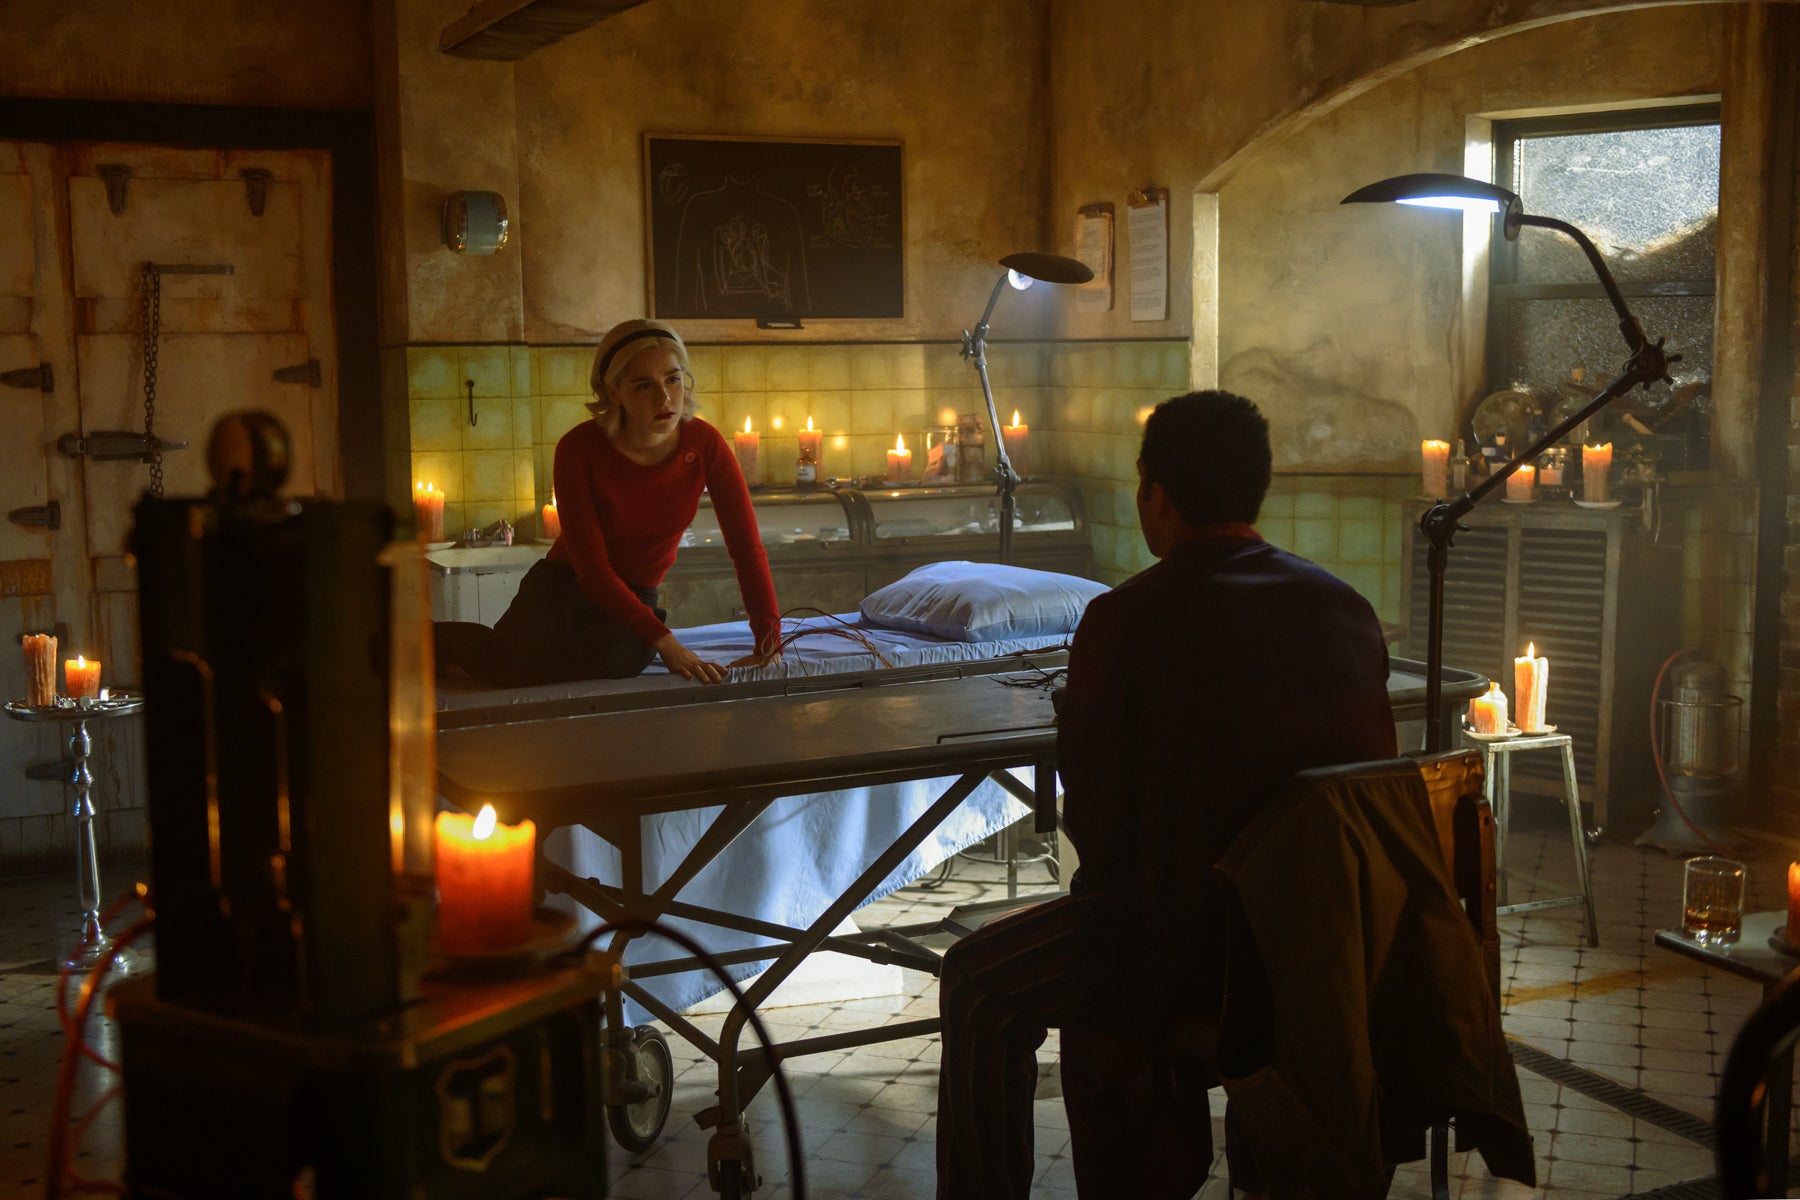 Sabrina Spellman sits on a stretcher in a mortuary speaking to a man with his back turned. The room is lit by several candles.